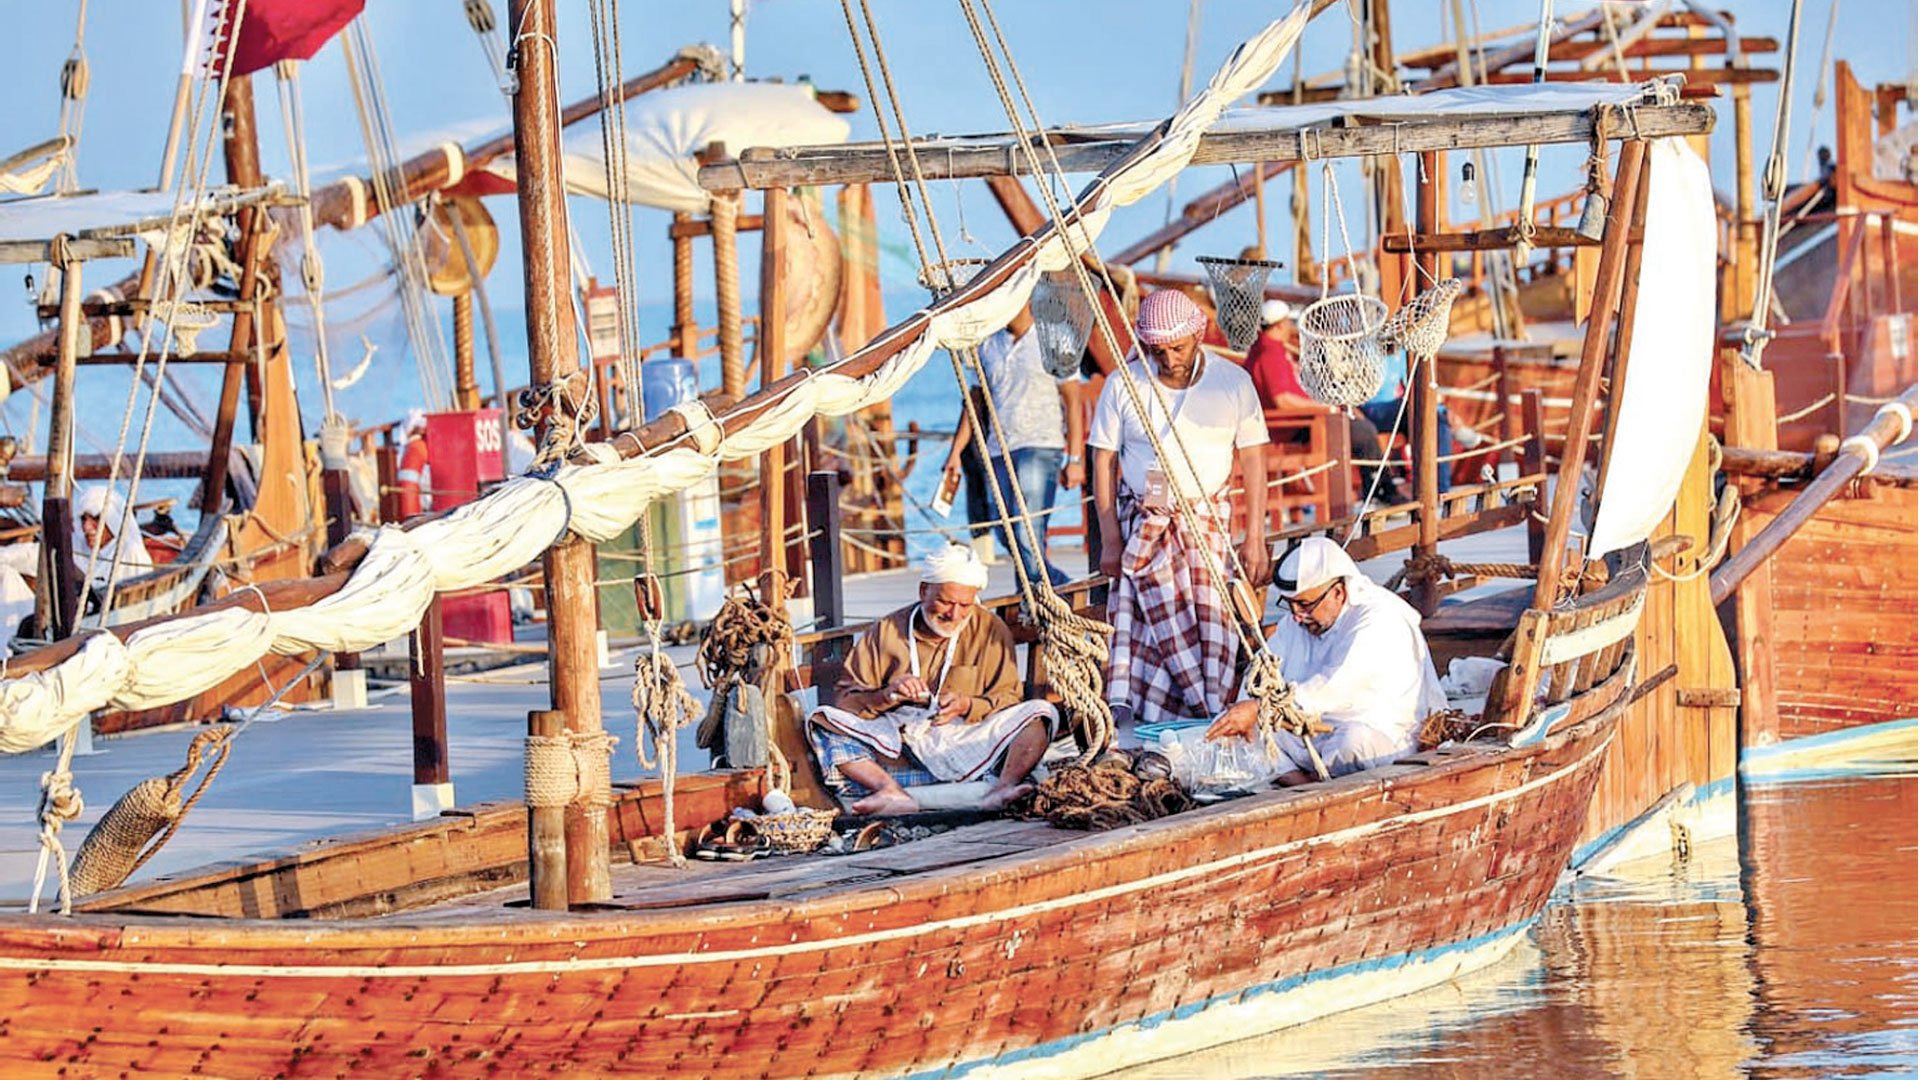 Ministry of Culture Partakes in Katara Traditional Dhow Festival